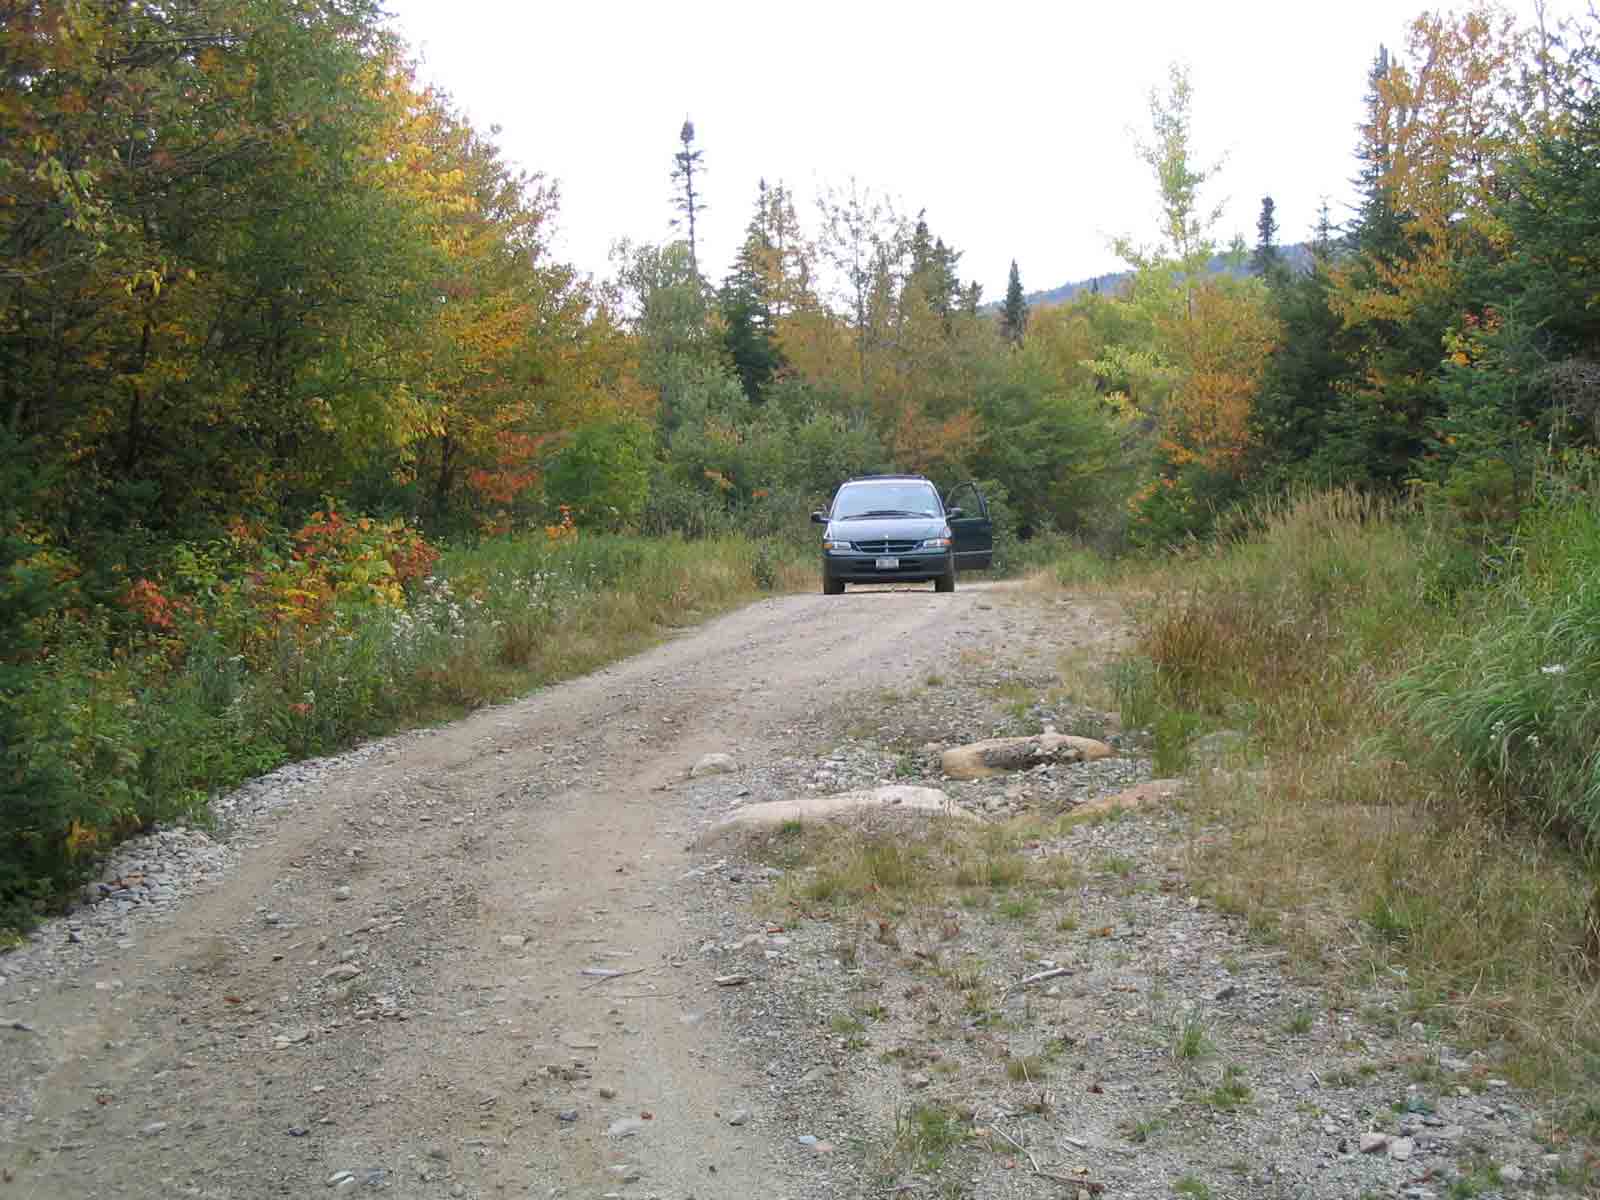 16.8 MM. Here is my Dodge Caravan negotiating the infamous Perham Stream Logging Road. This is probably the roughest approach road used to access the Apalachian Trail anywhere in its course from Georgia to Maine.  Courtesy askus3@optonline.net